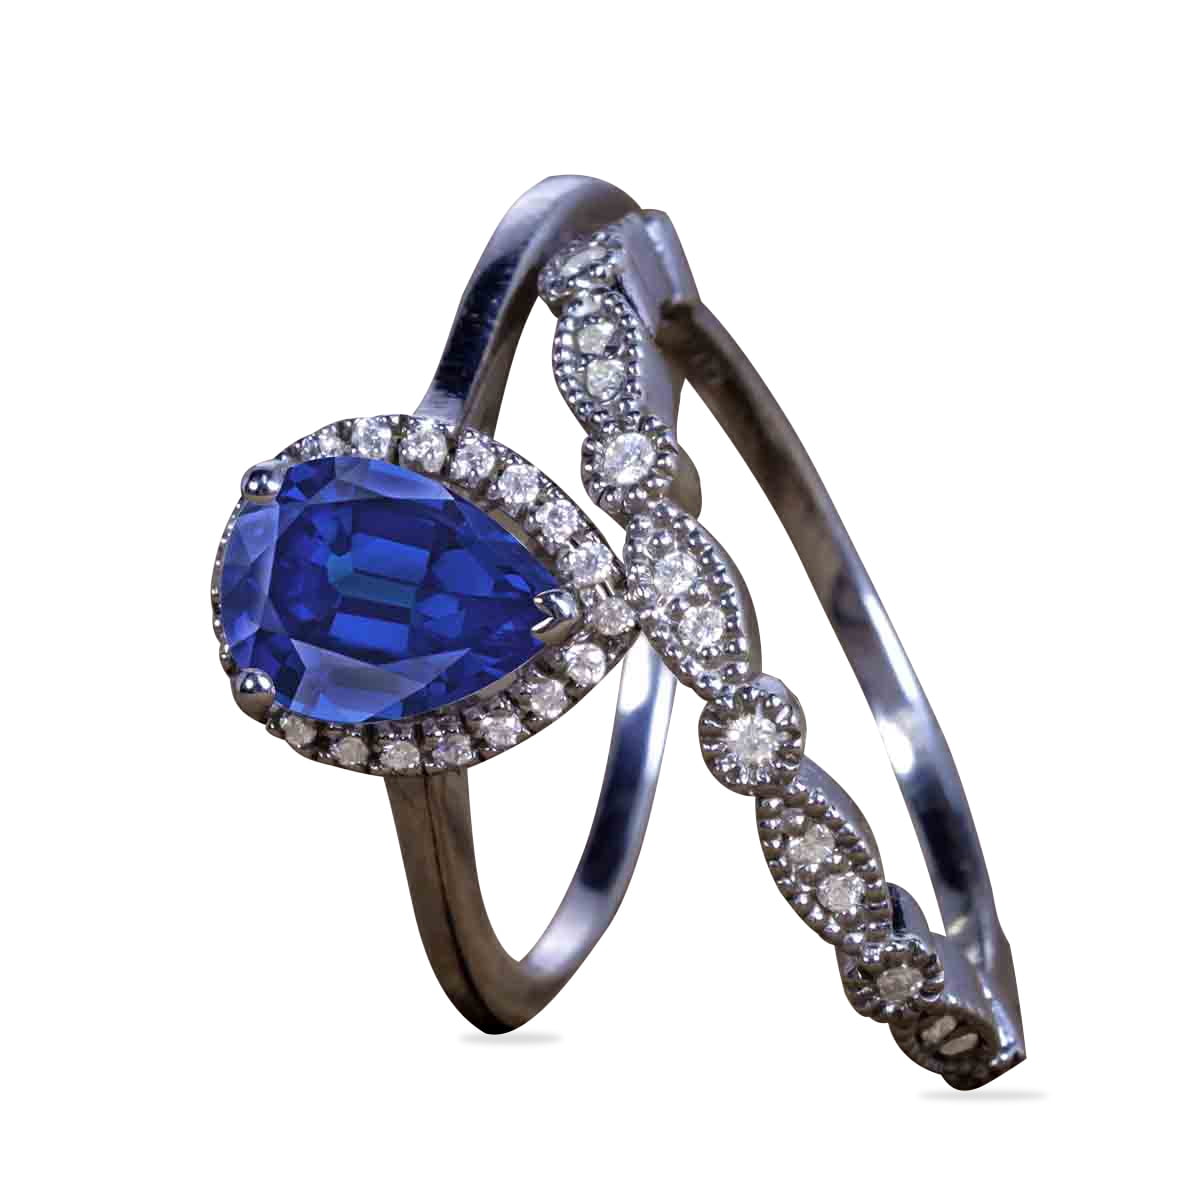 Blue Sapphire Engagement Ring 2.50 CT Princess Cut Sapphire Halo Diamond Engagement Ring For Her With 14kt White Gold OverSilver Gifts